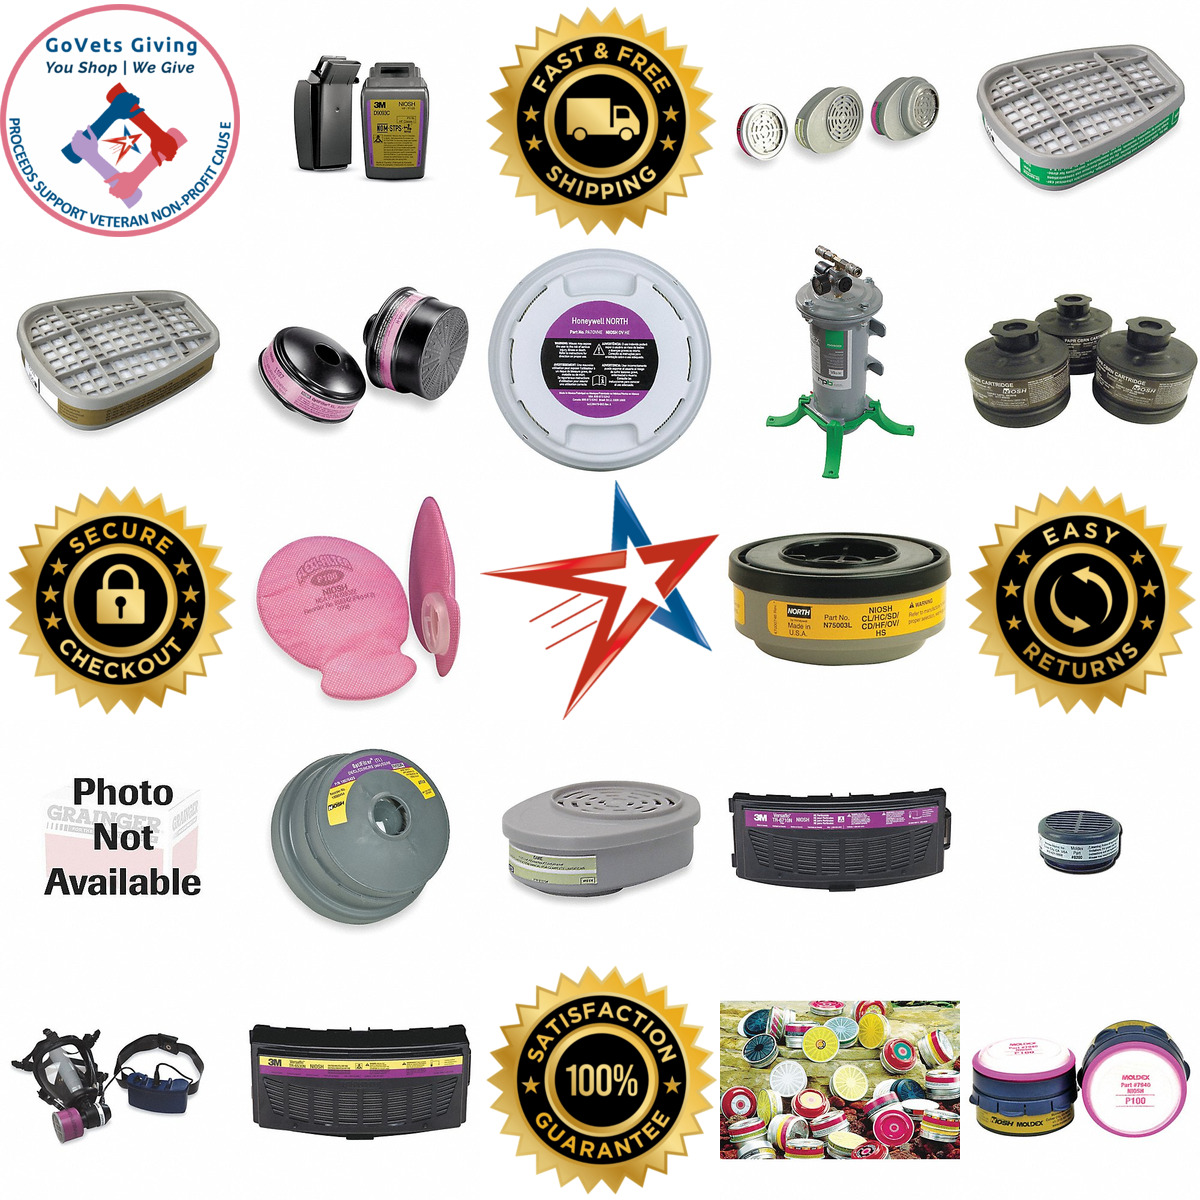 A selection of Cartridges and Filters products on GoVets